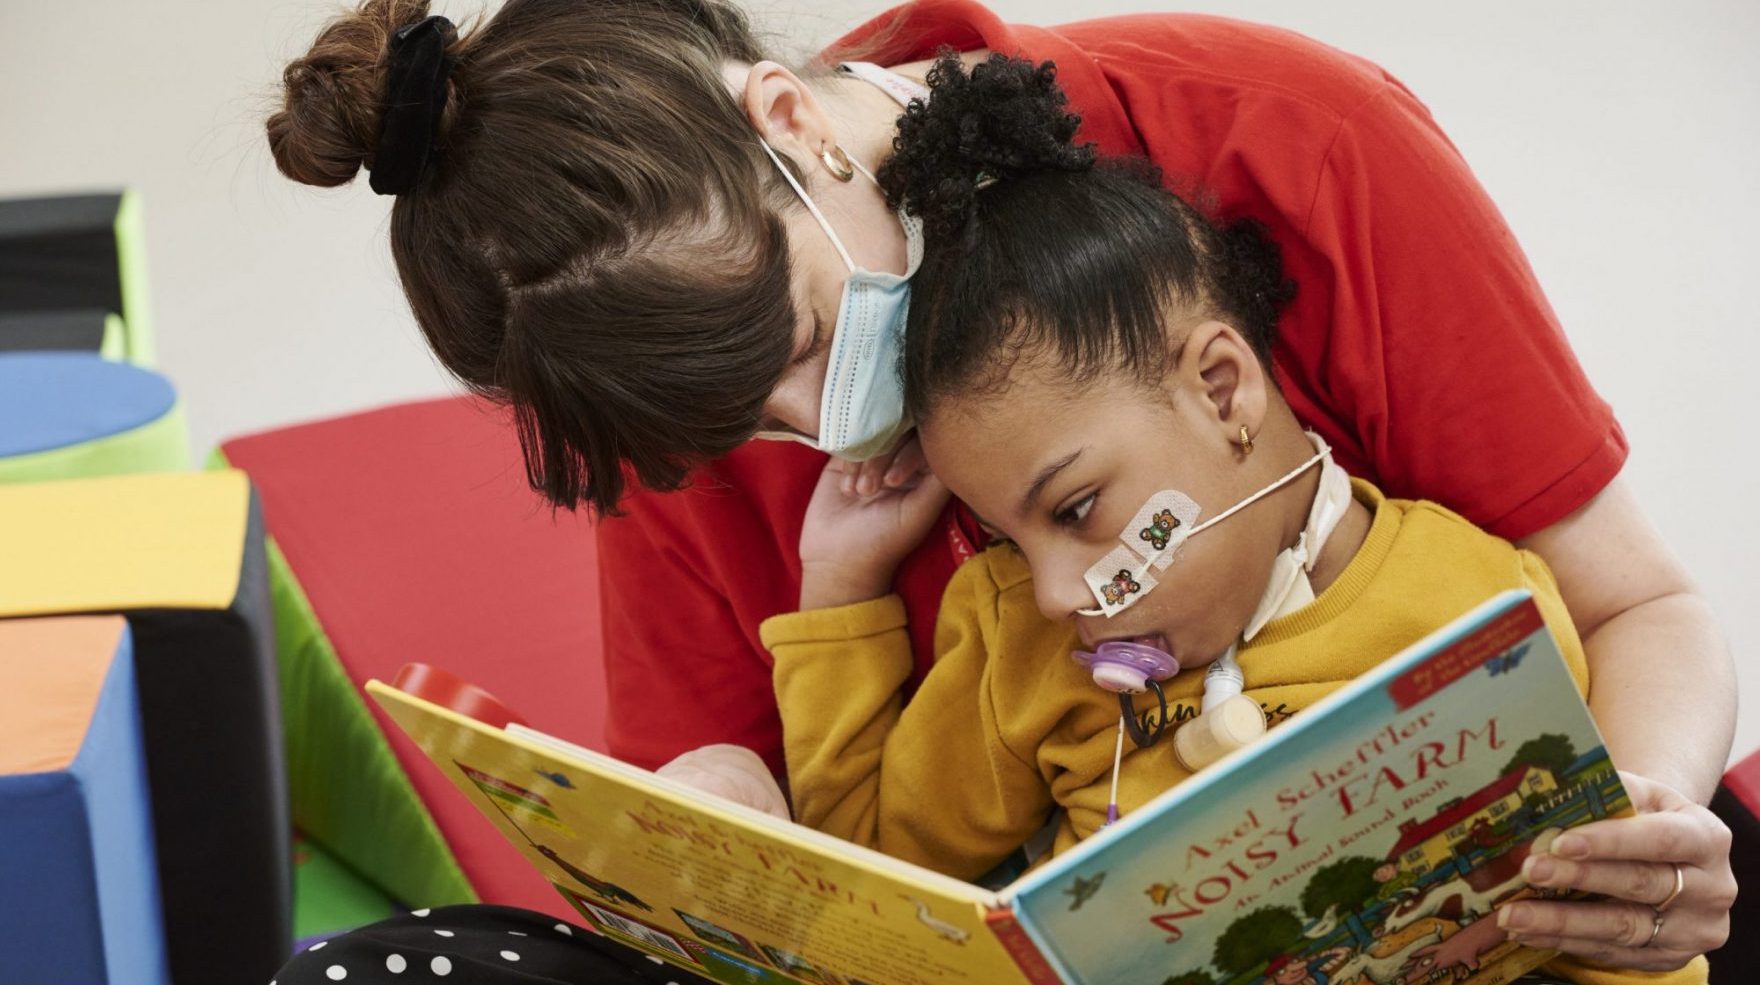 A Noah’s Ark Children’s Hospice volunteer reads a book to a young girl.